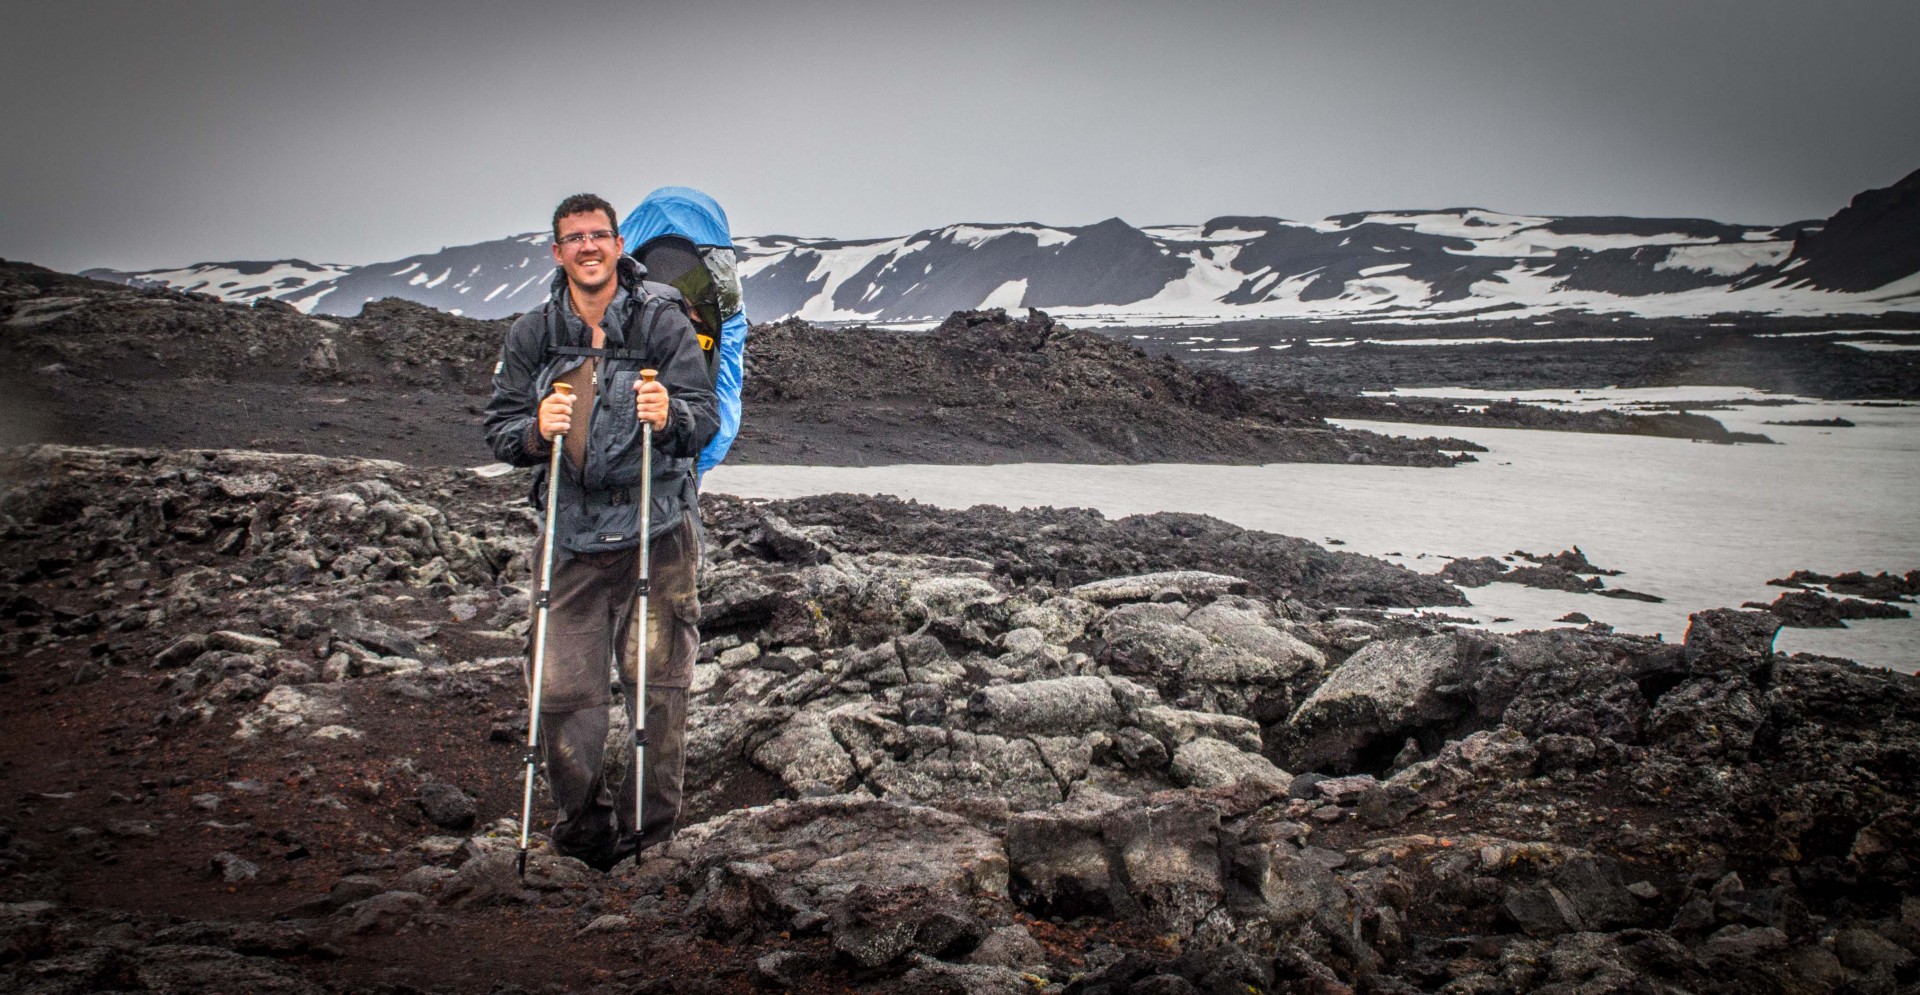 Man carrying infant in a kid-carrier standing on rocks and snow in the Icelandic Highlands